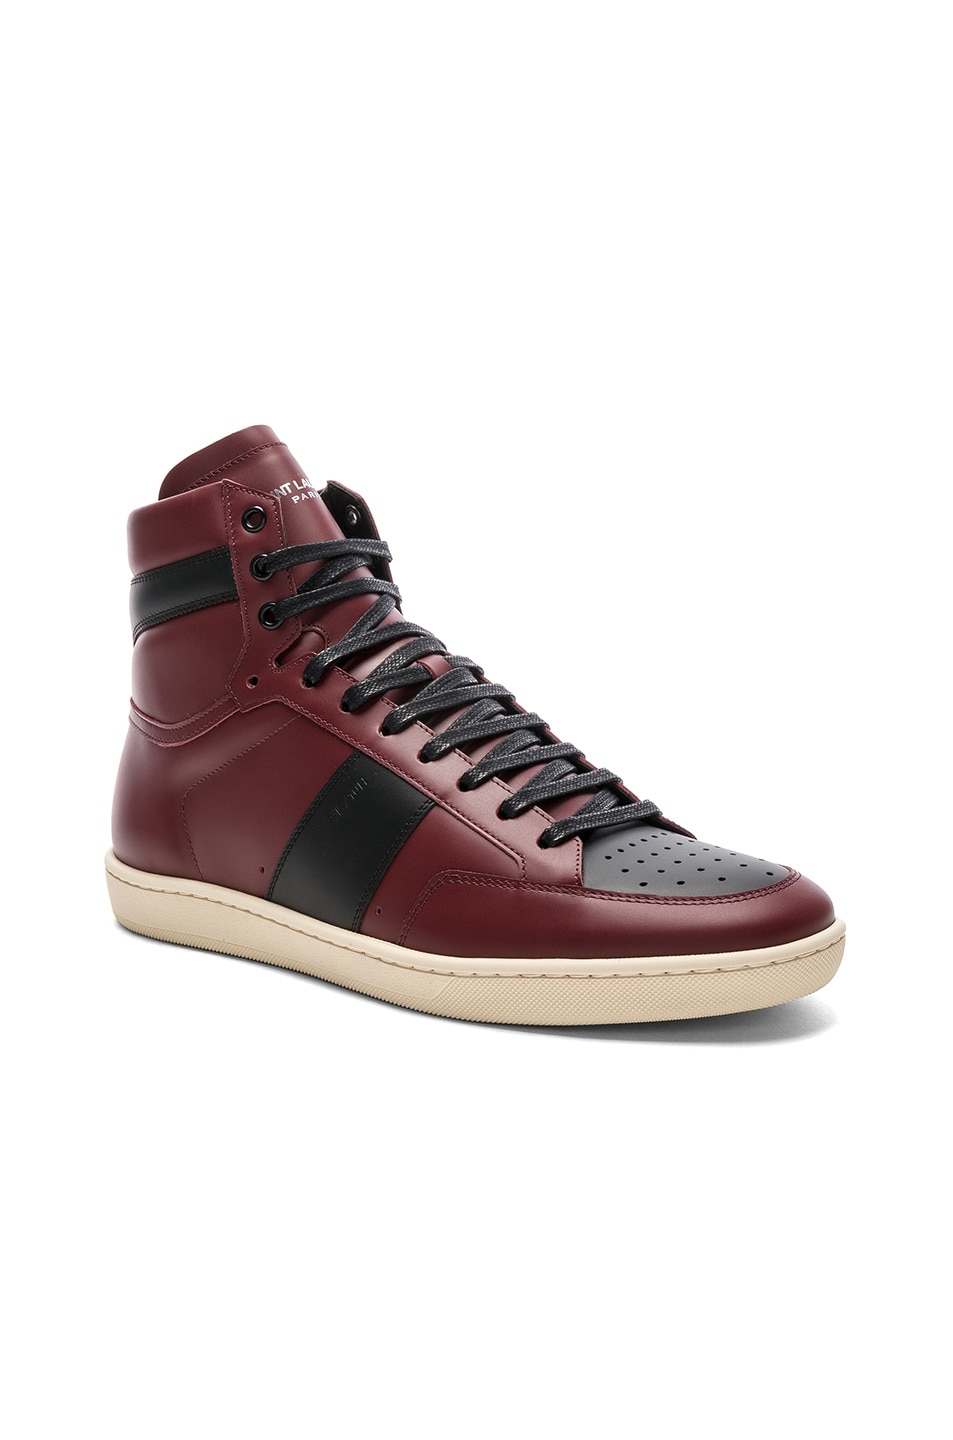 Image 1 of Saint Laurent Signature Court Classic SL/10H Leather High Top Sneakers in Black & Red